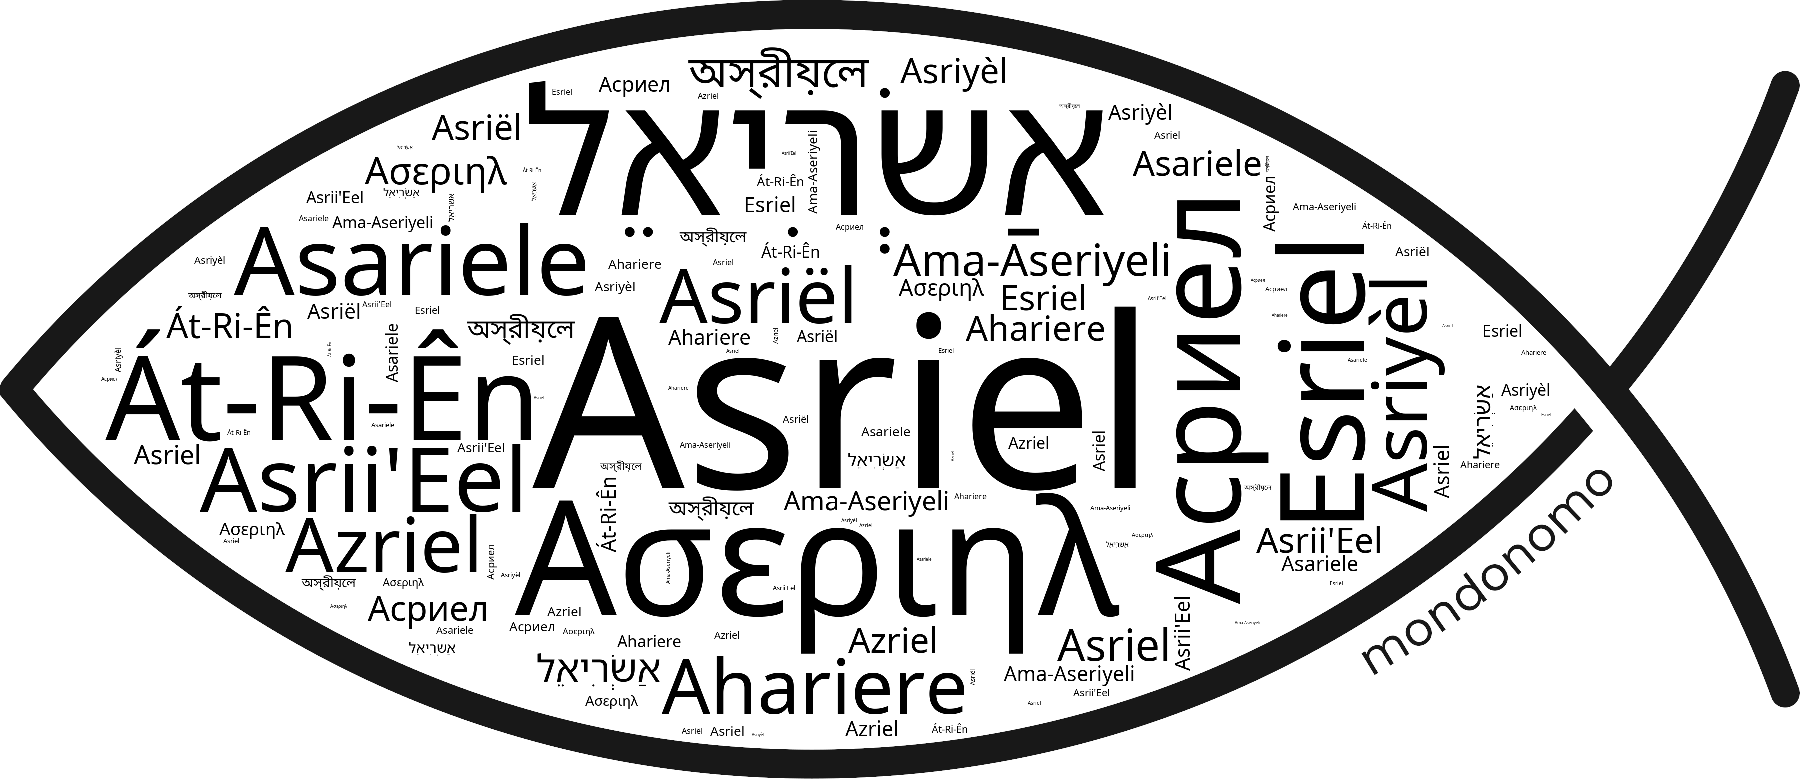 Name Asriel in the world's Bibles